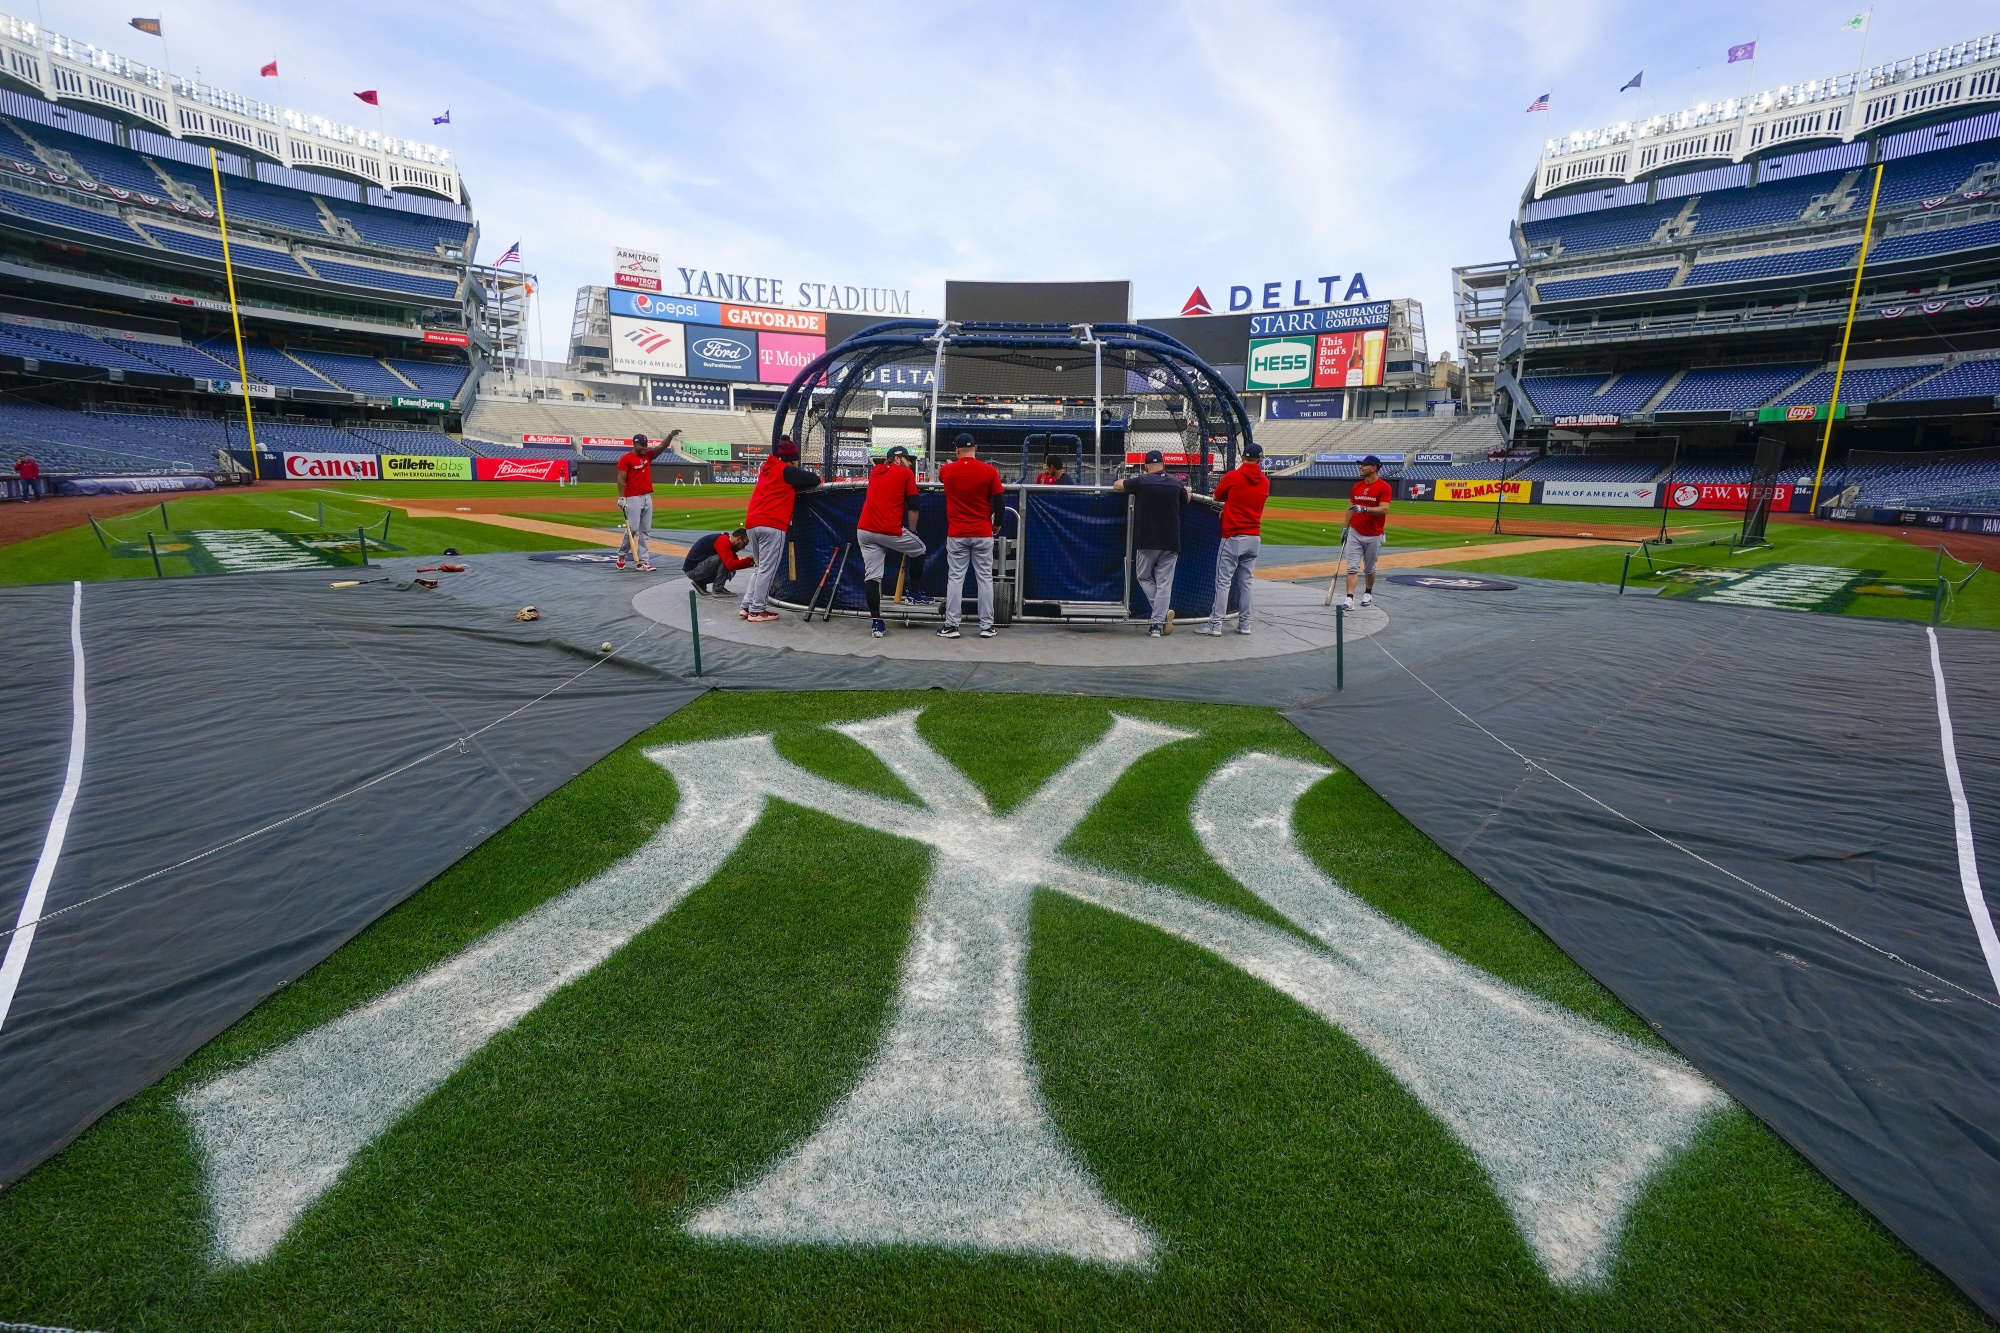 Readers sound off on Yankees retired numbers, the GOP and the 9/11